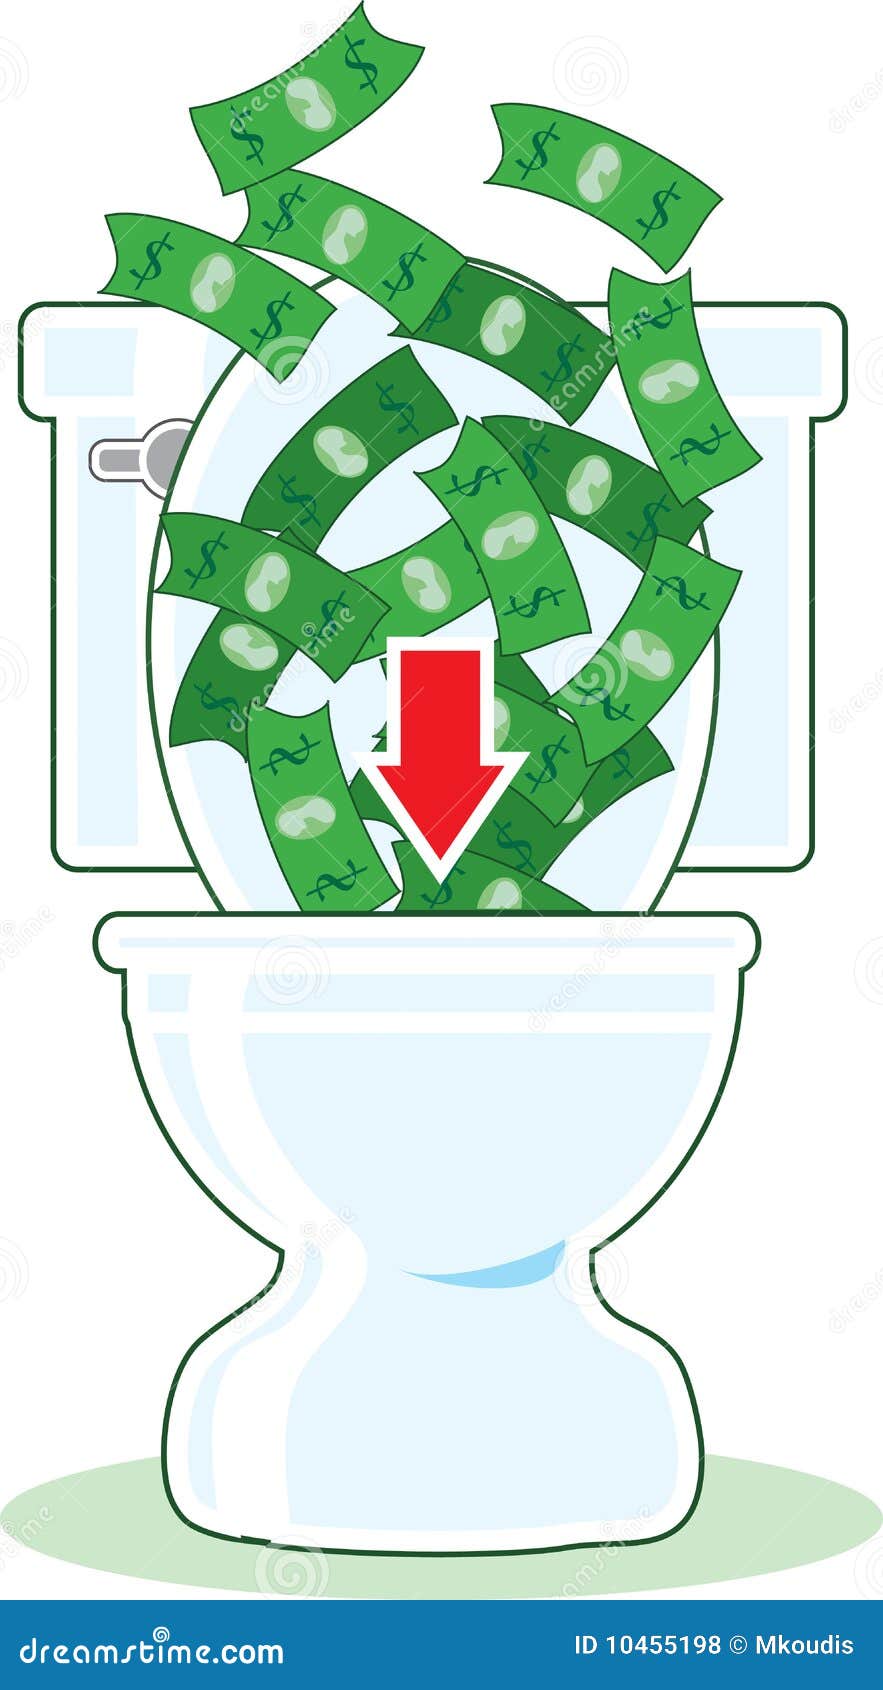 clipart of money going down the drain - photo #28